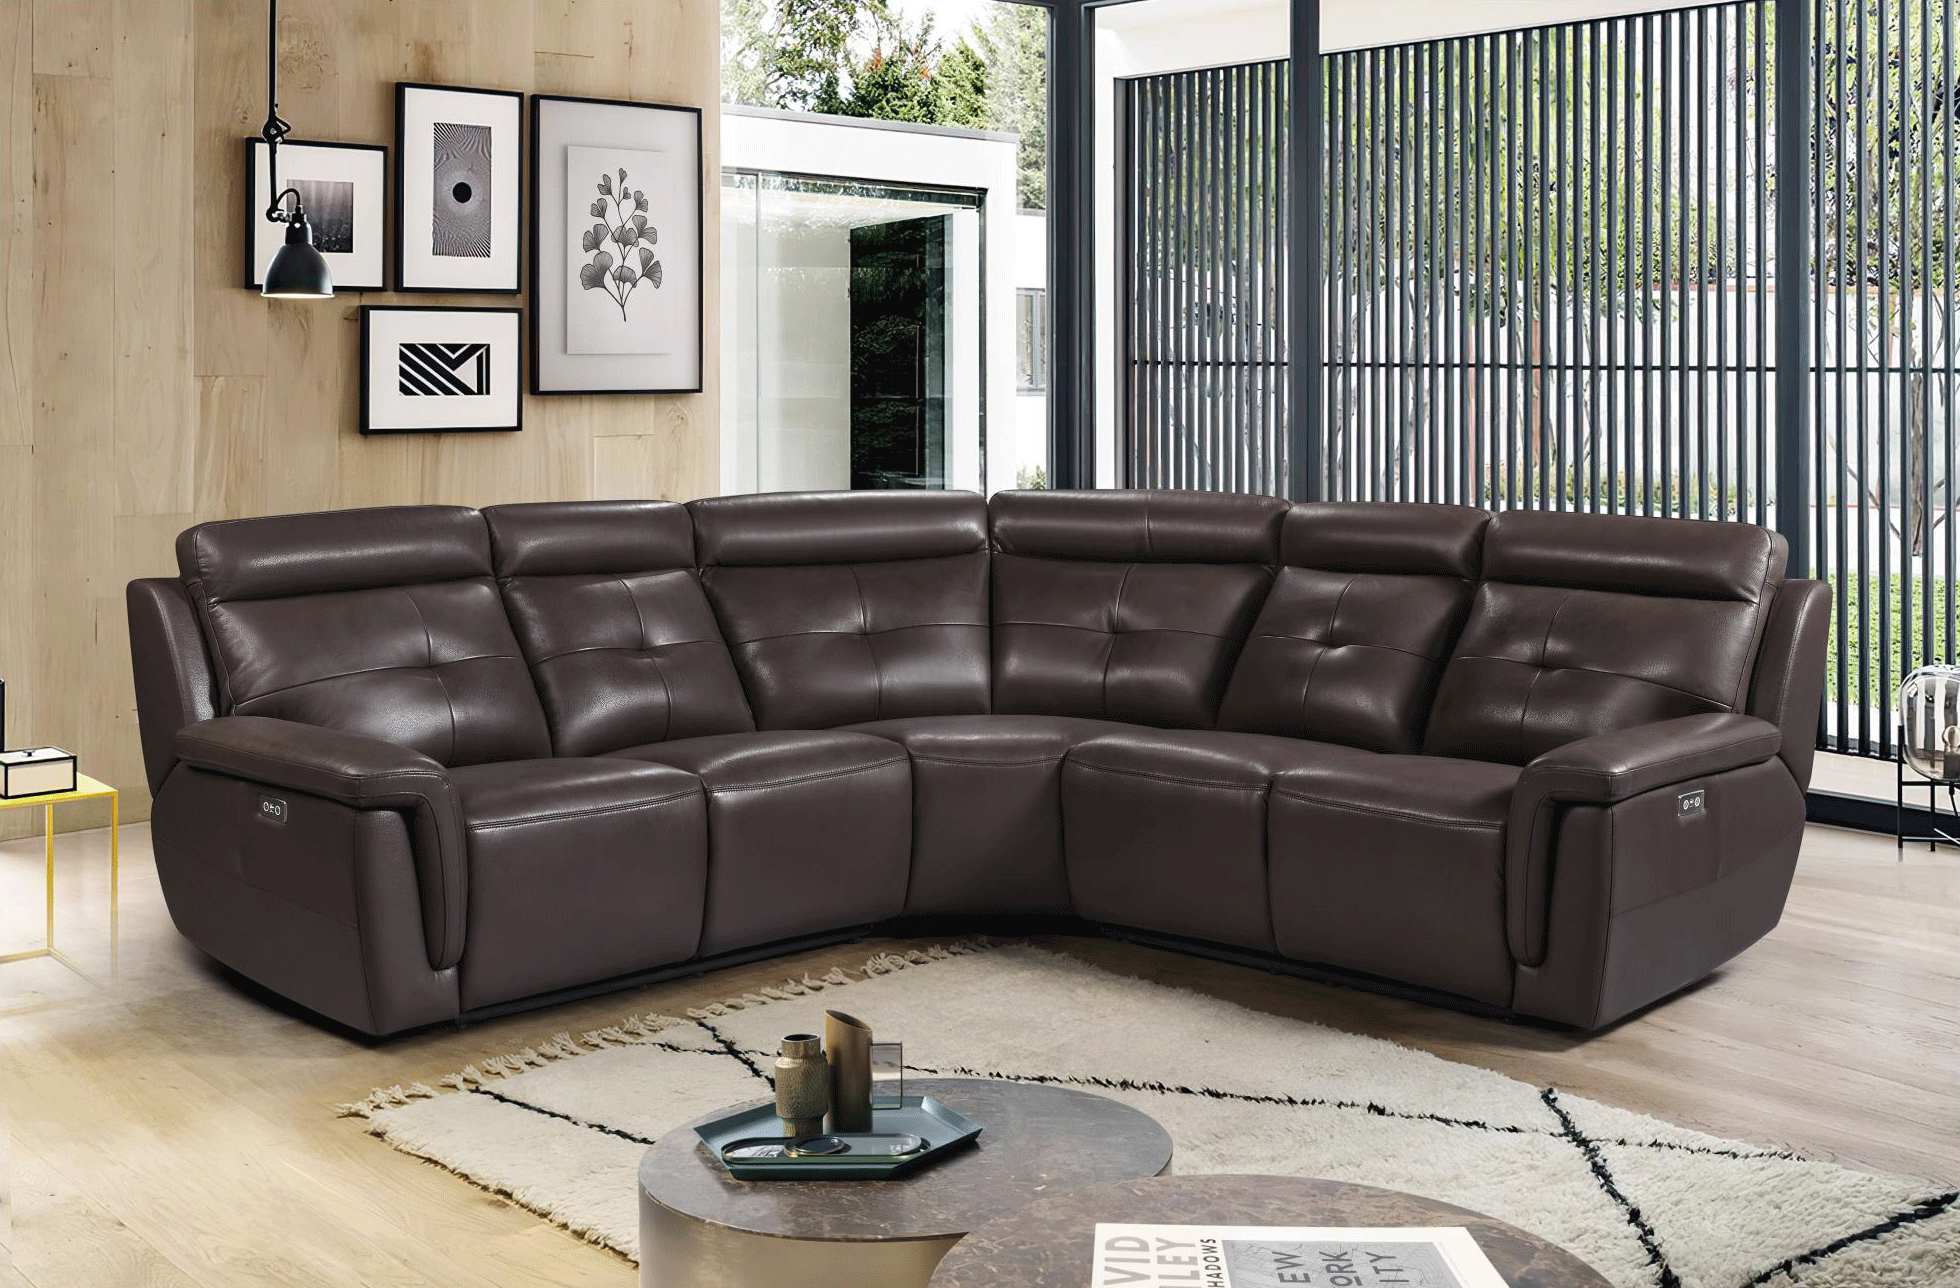 Brands Status Modern Collections, Italy 2937 Sectional w/ electric recliners